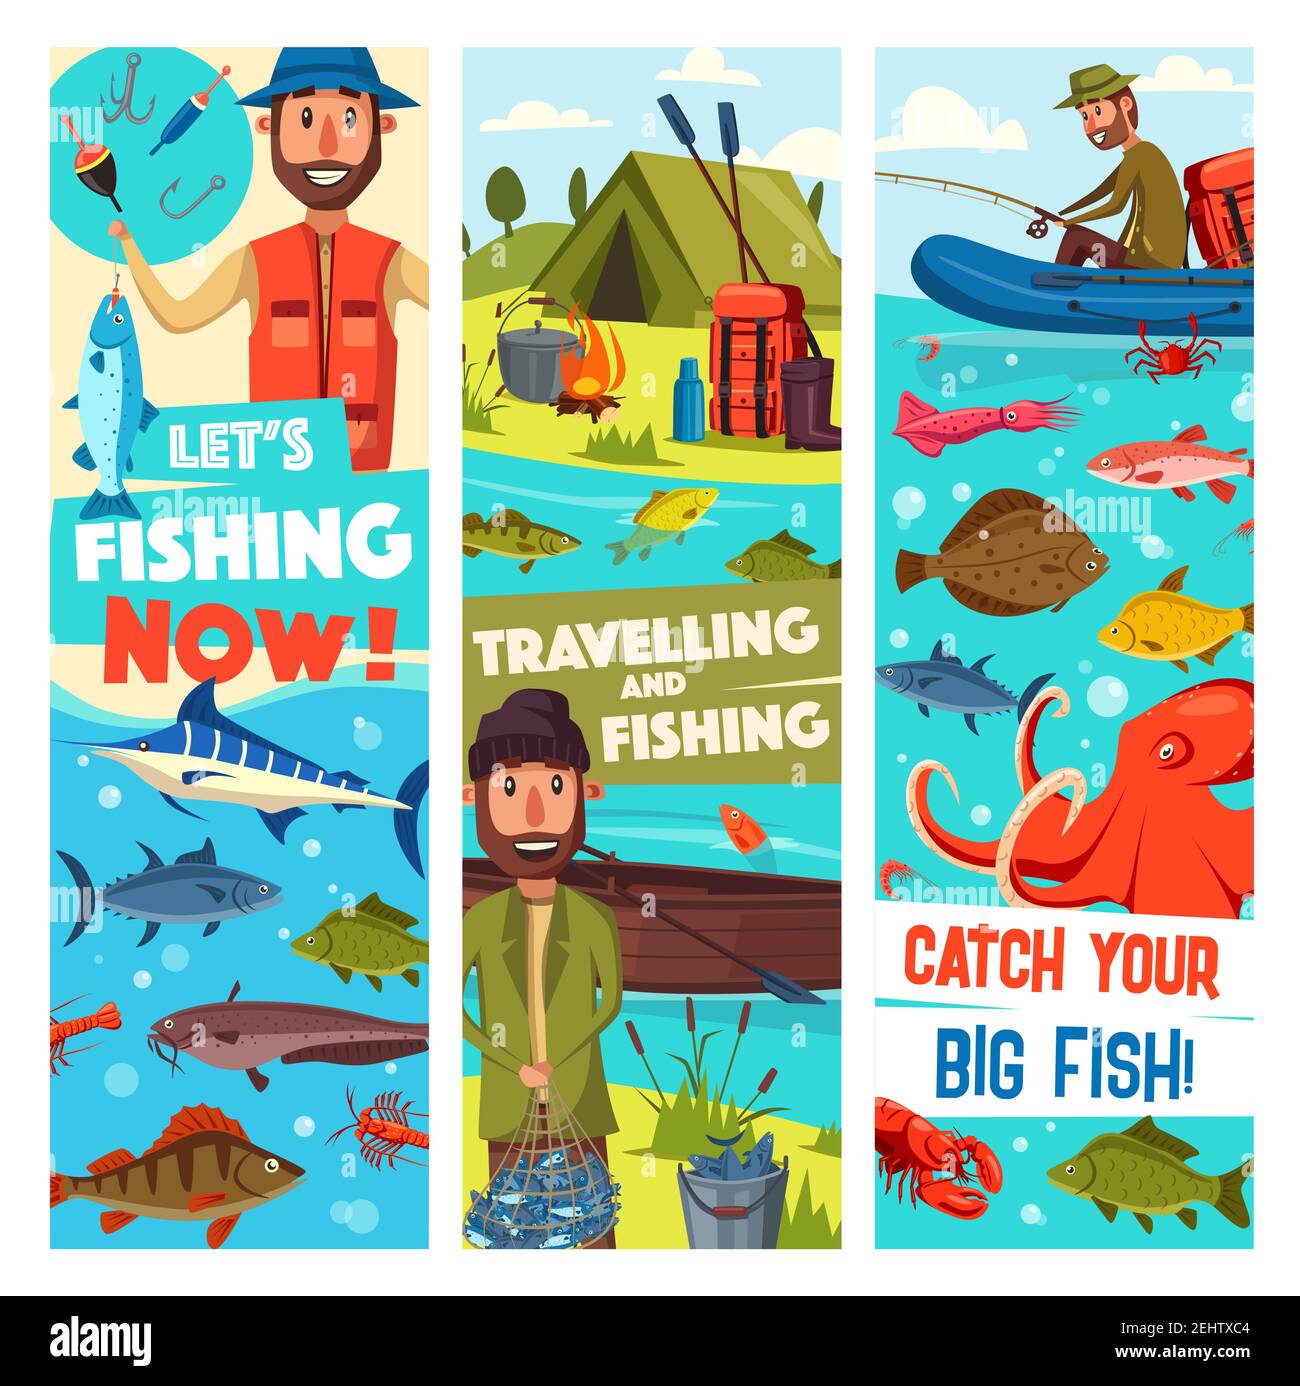 Fishing and traveling or fisher adventure banners for fish catch advertisement. Vector cartoon fisherman man in inflatable boat on river or sea with r Stock Vector